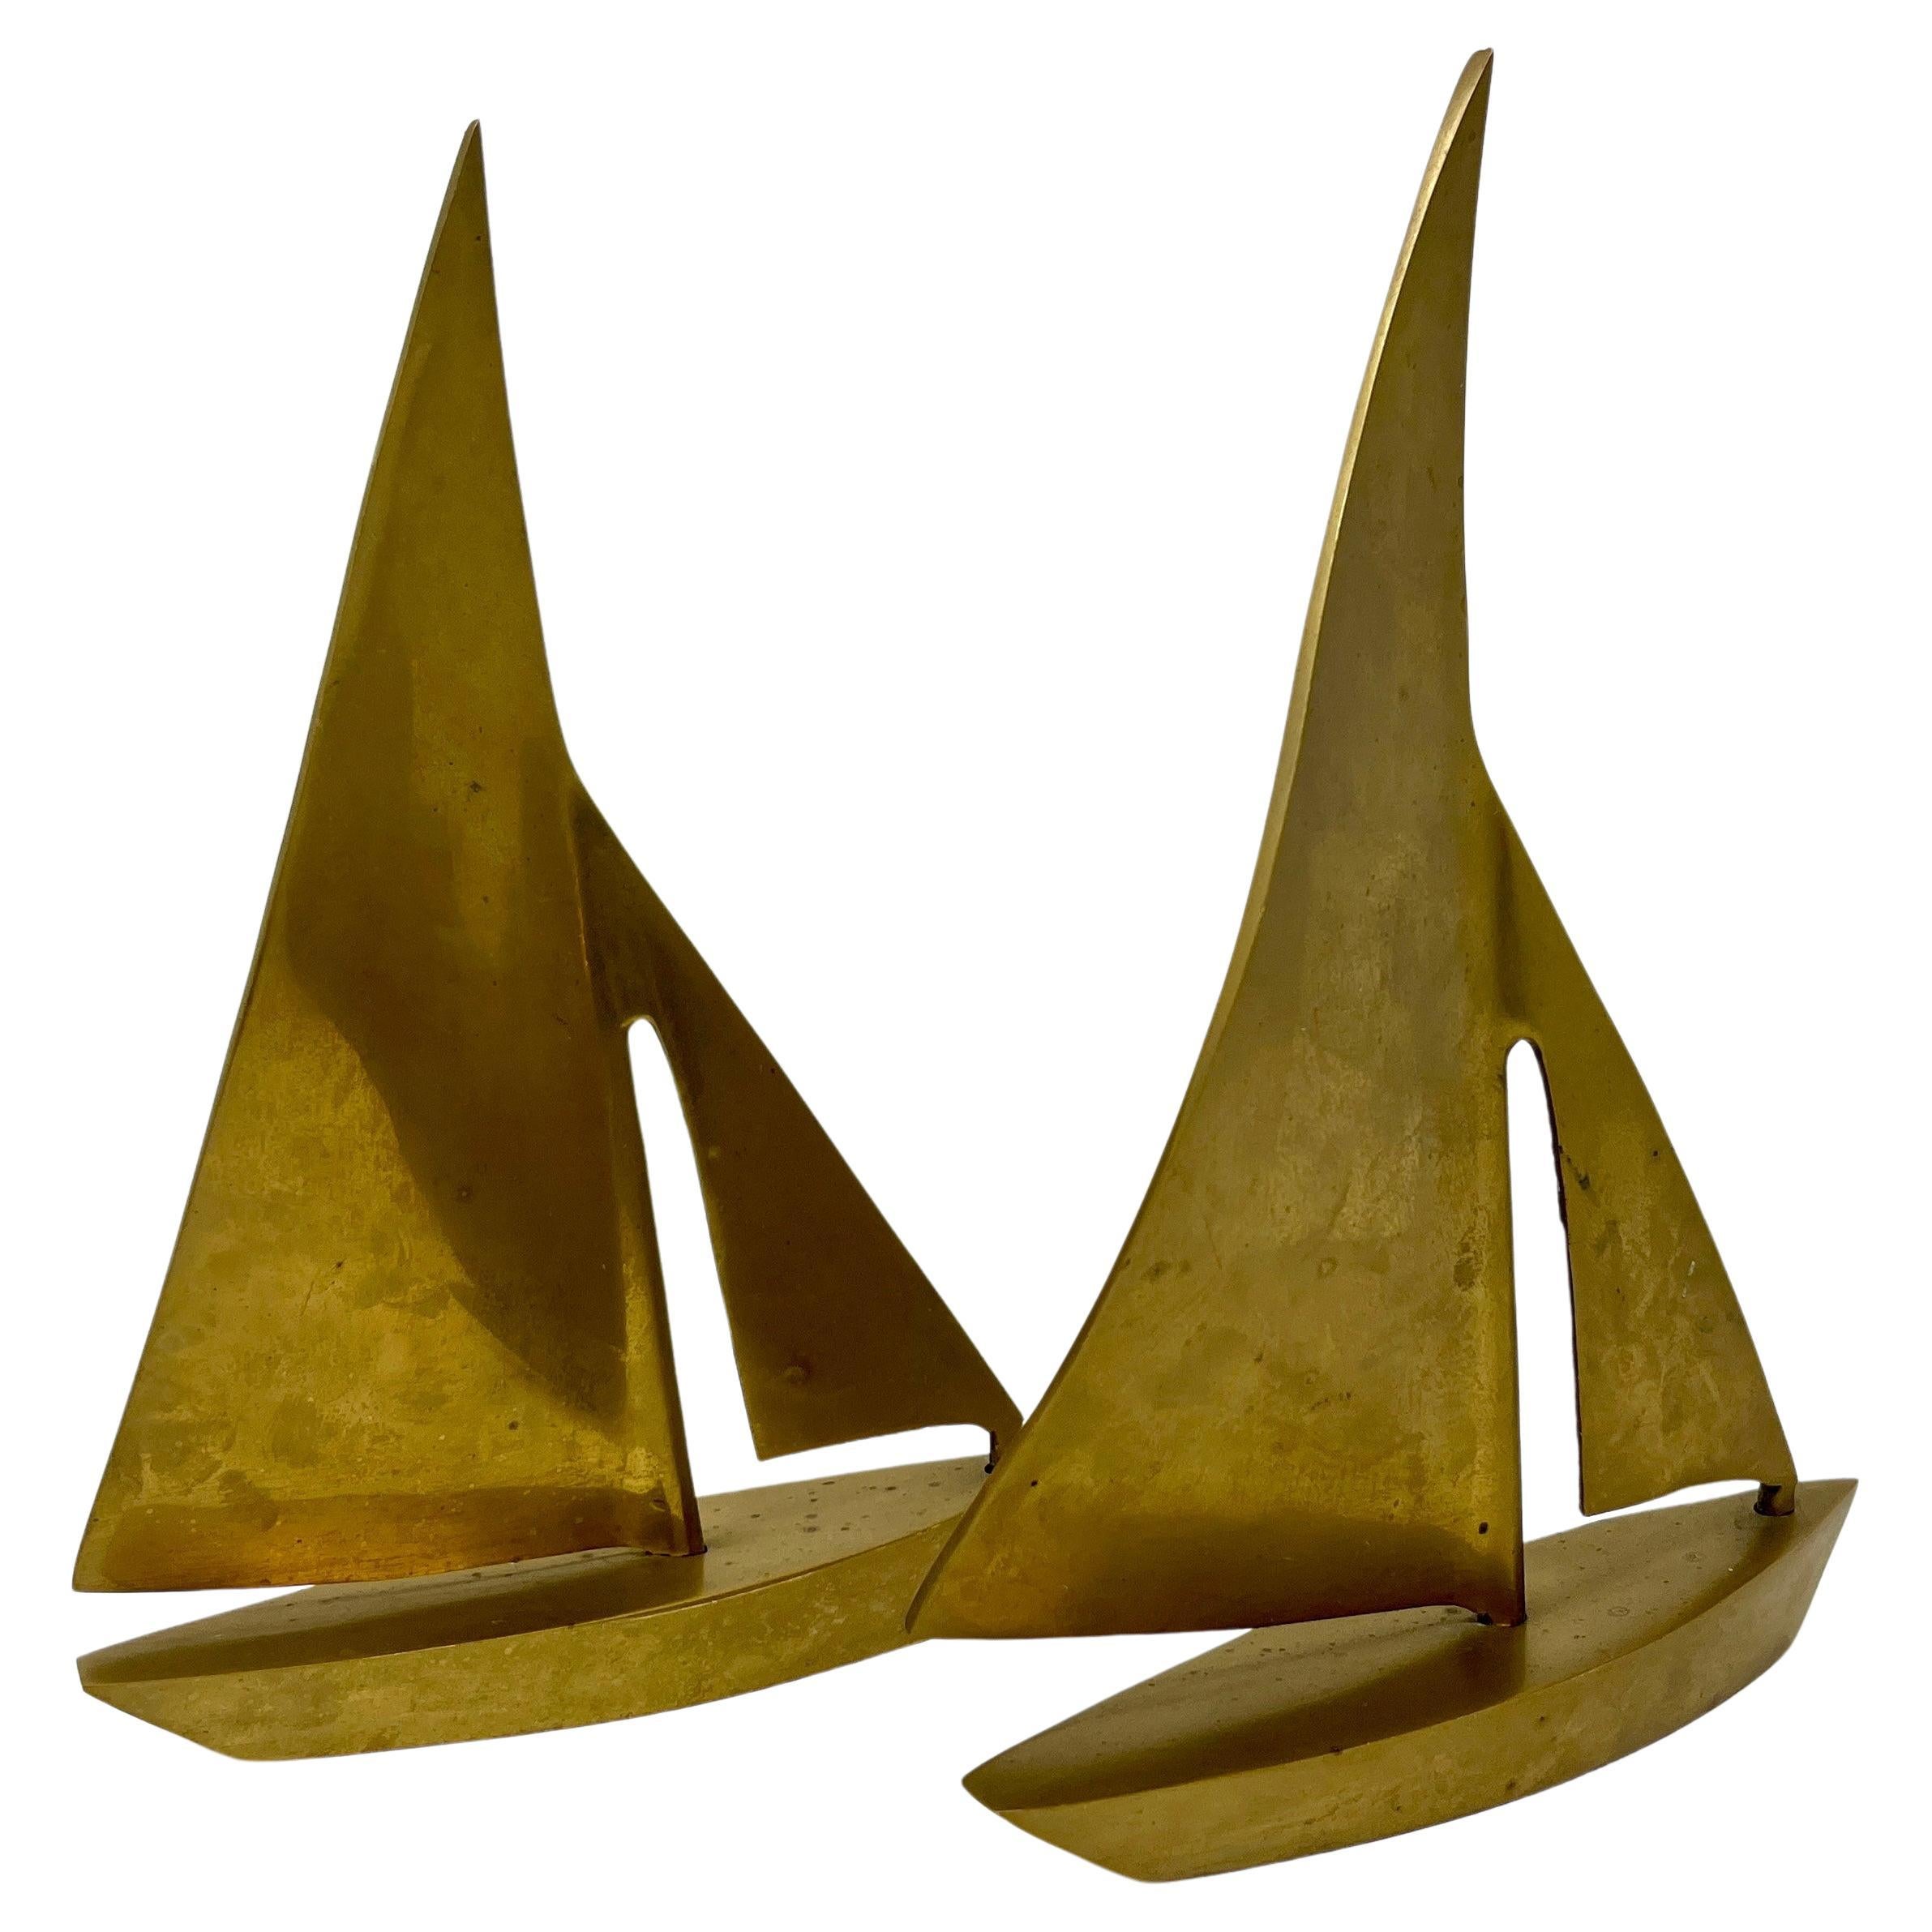 Pair of heavy patinated brass sailboat bookends made in Taiwan, probably for export, likely in the 1980s. Also great as simple sculptures or display pieces in a coastal home. 

Very good vintage condition. Have NOT been polished, so they have an